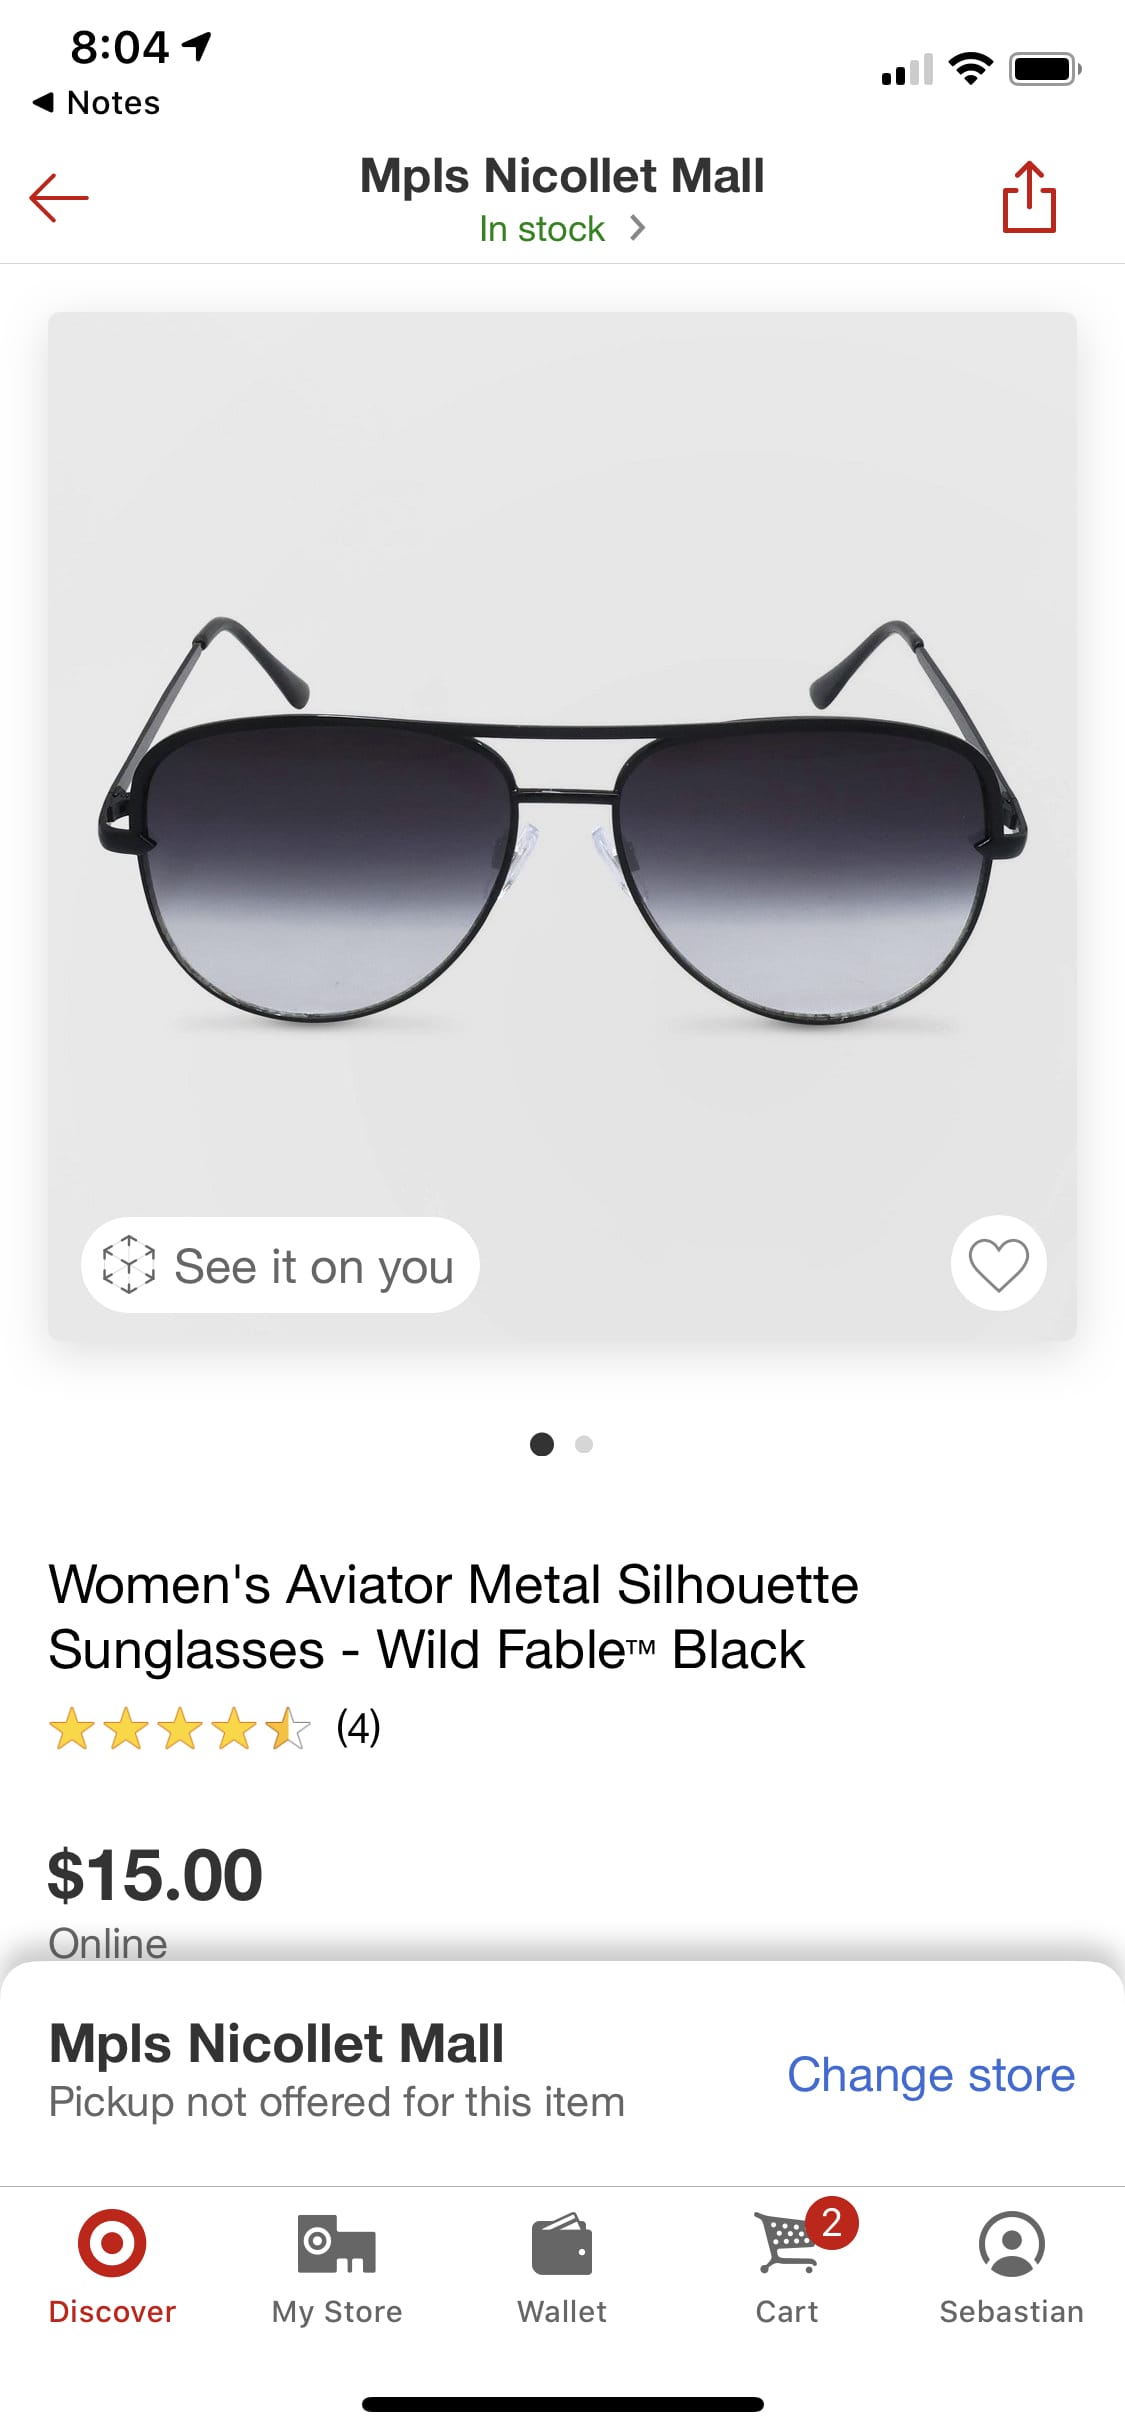 Screenshot of Target mobile app showing See it on you button on the product detail page of a pair of sunglasses